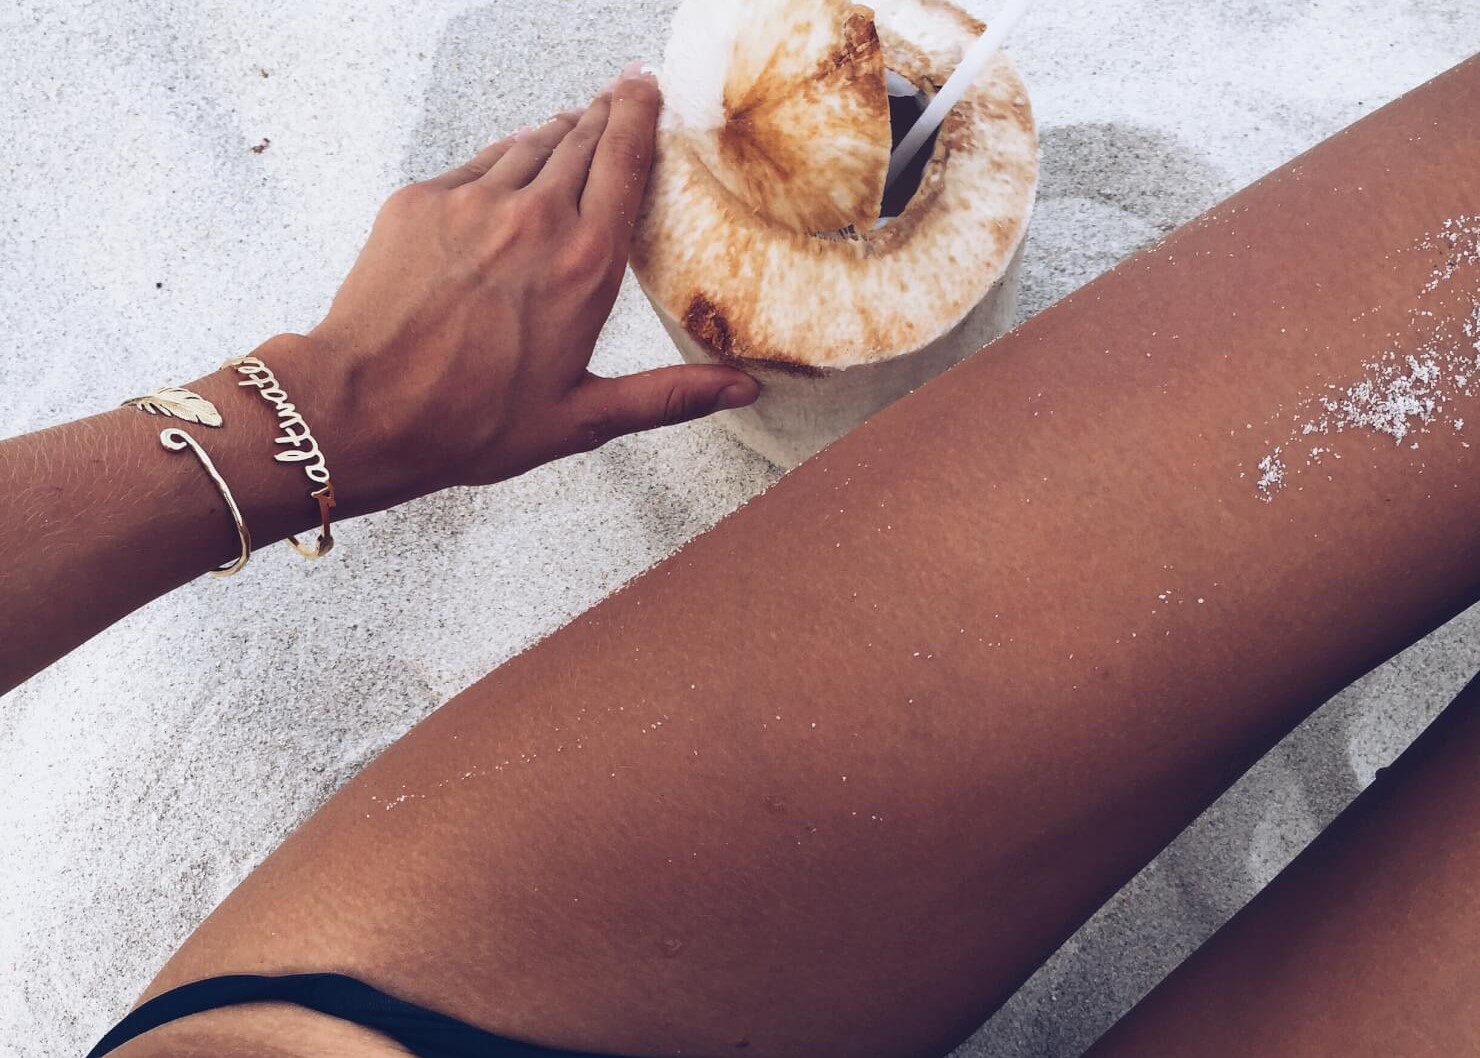 tan girl with coconut at beach